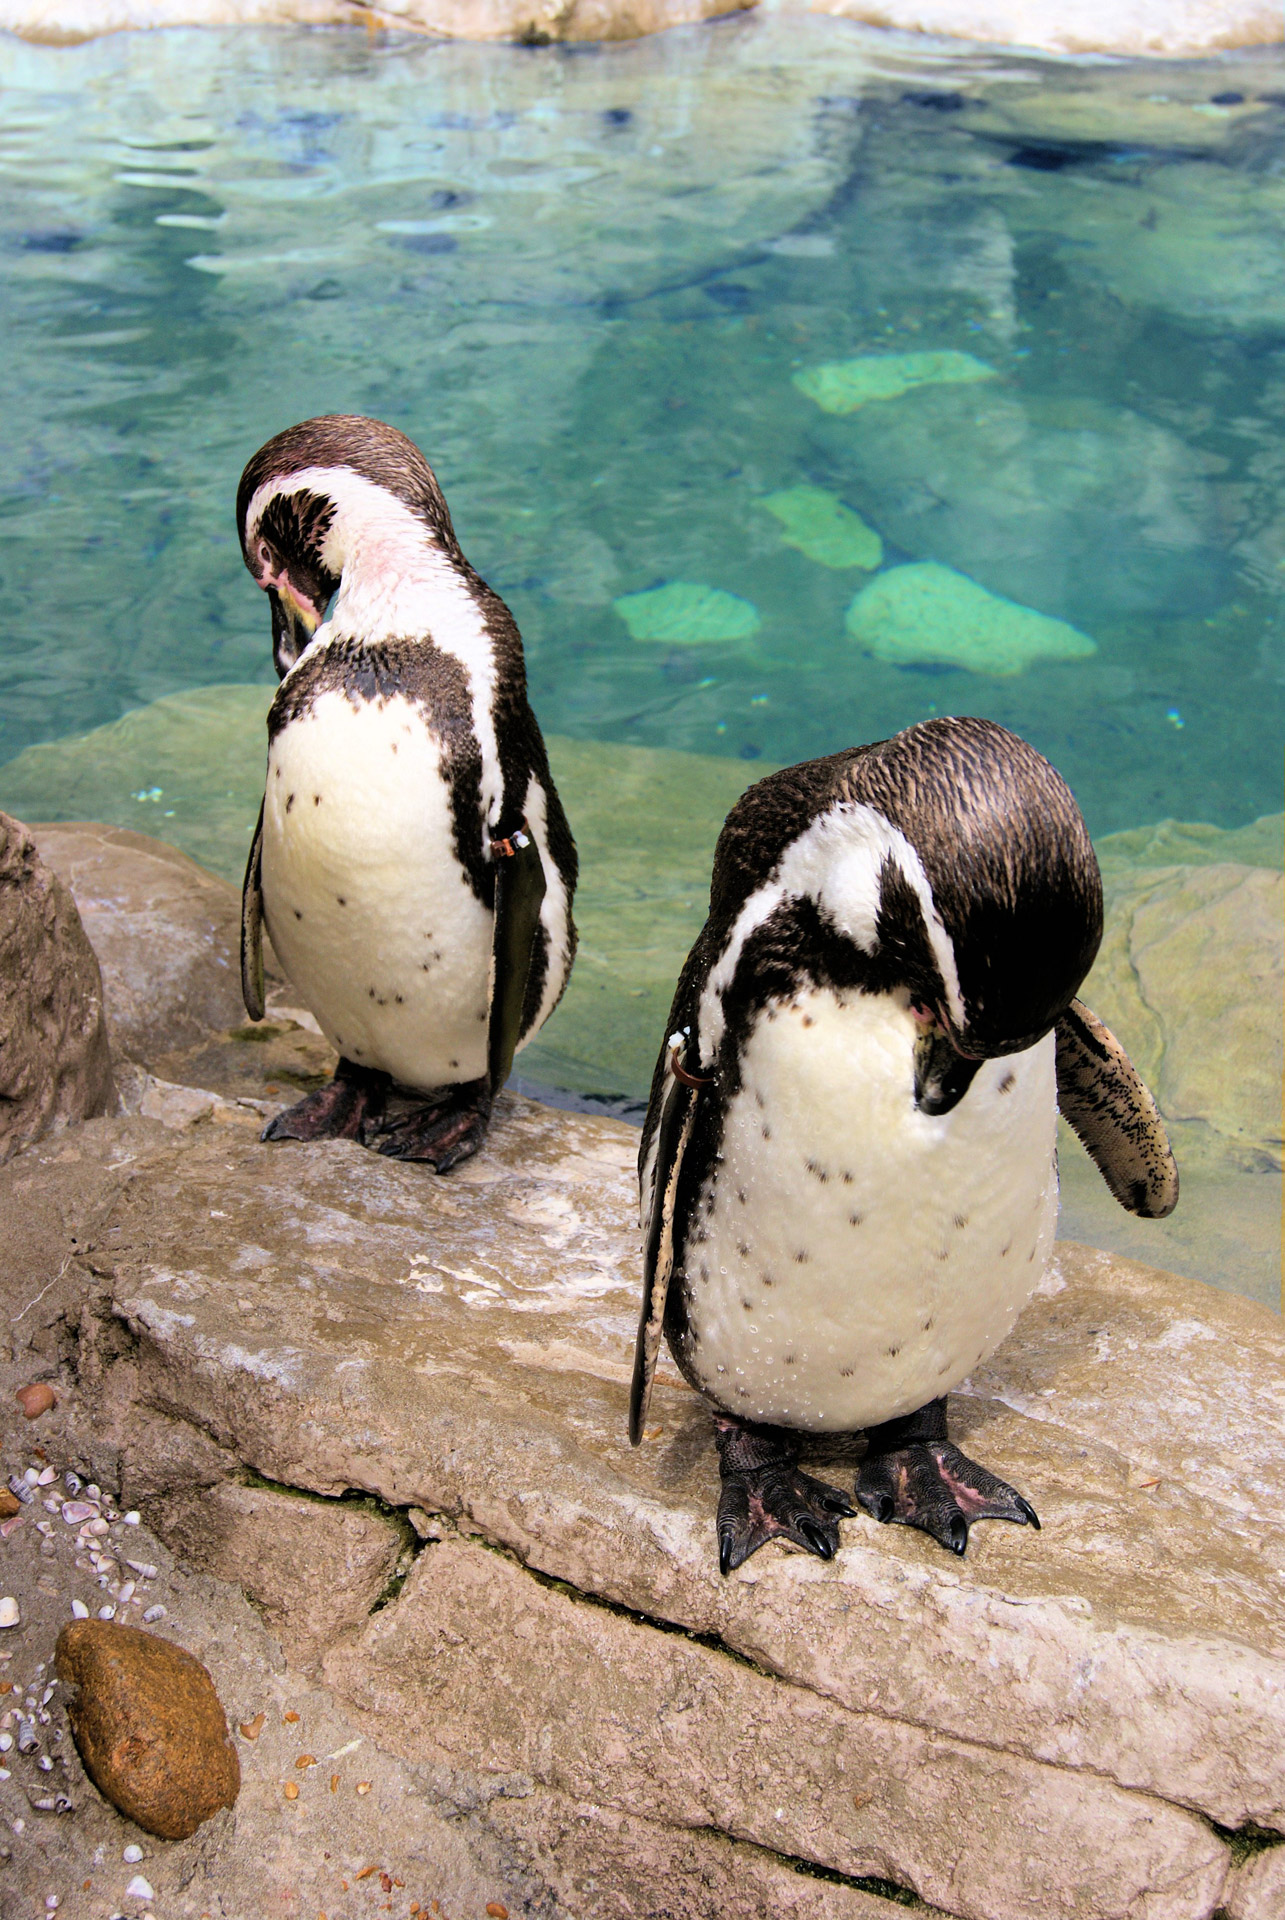 File:Two penguins at St Louis 0 - Wikimedia Commons